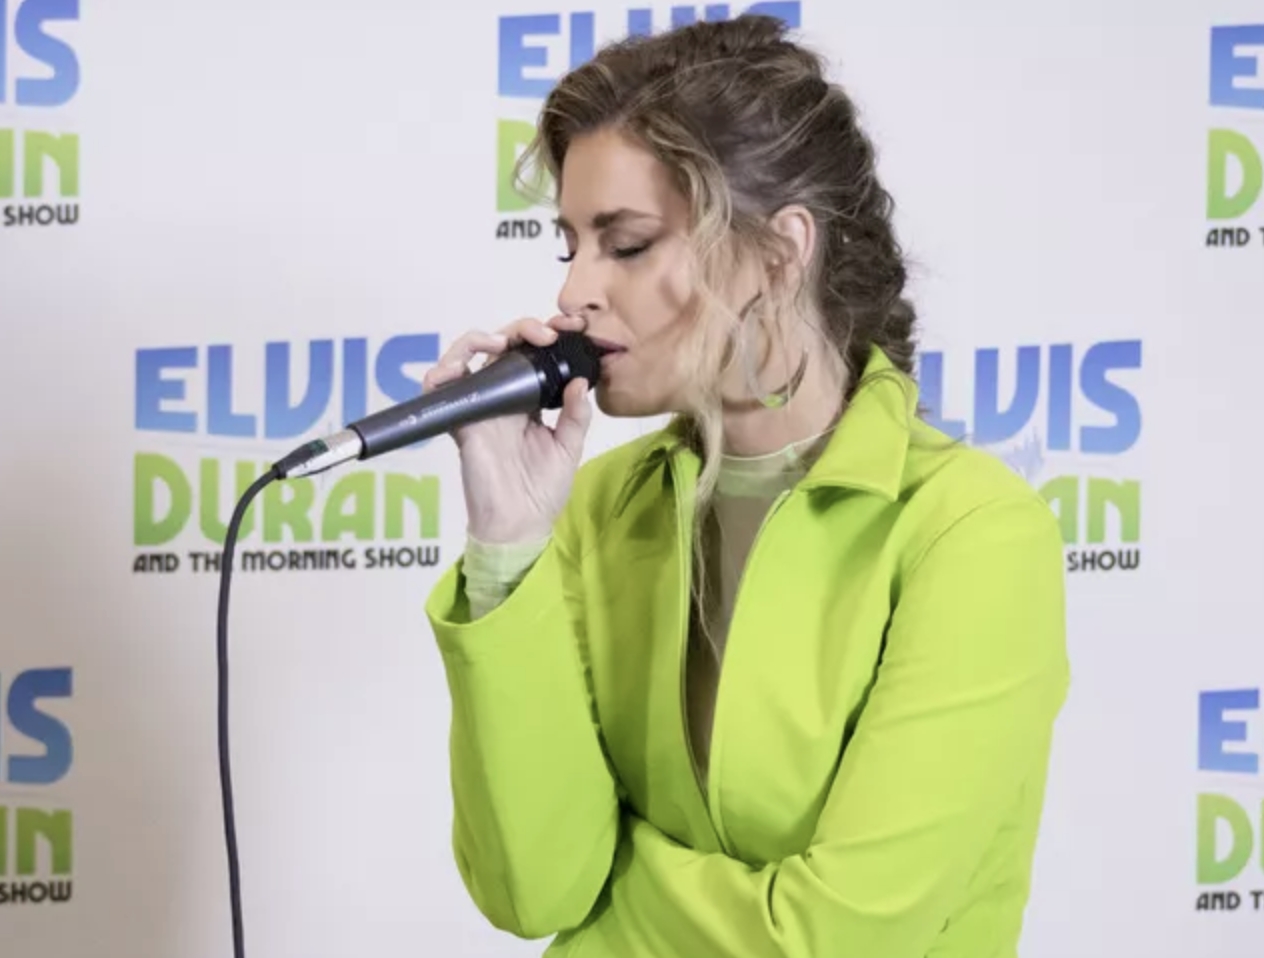 Finding Fletcher live on the Elvis Duran morning show